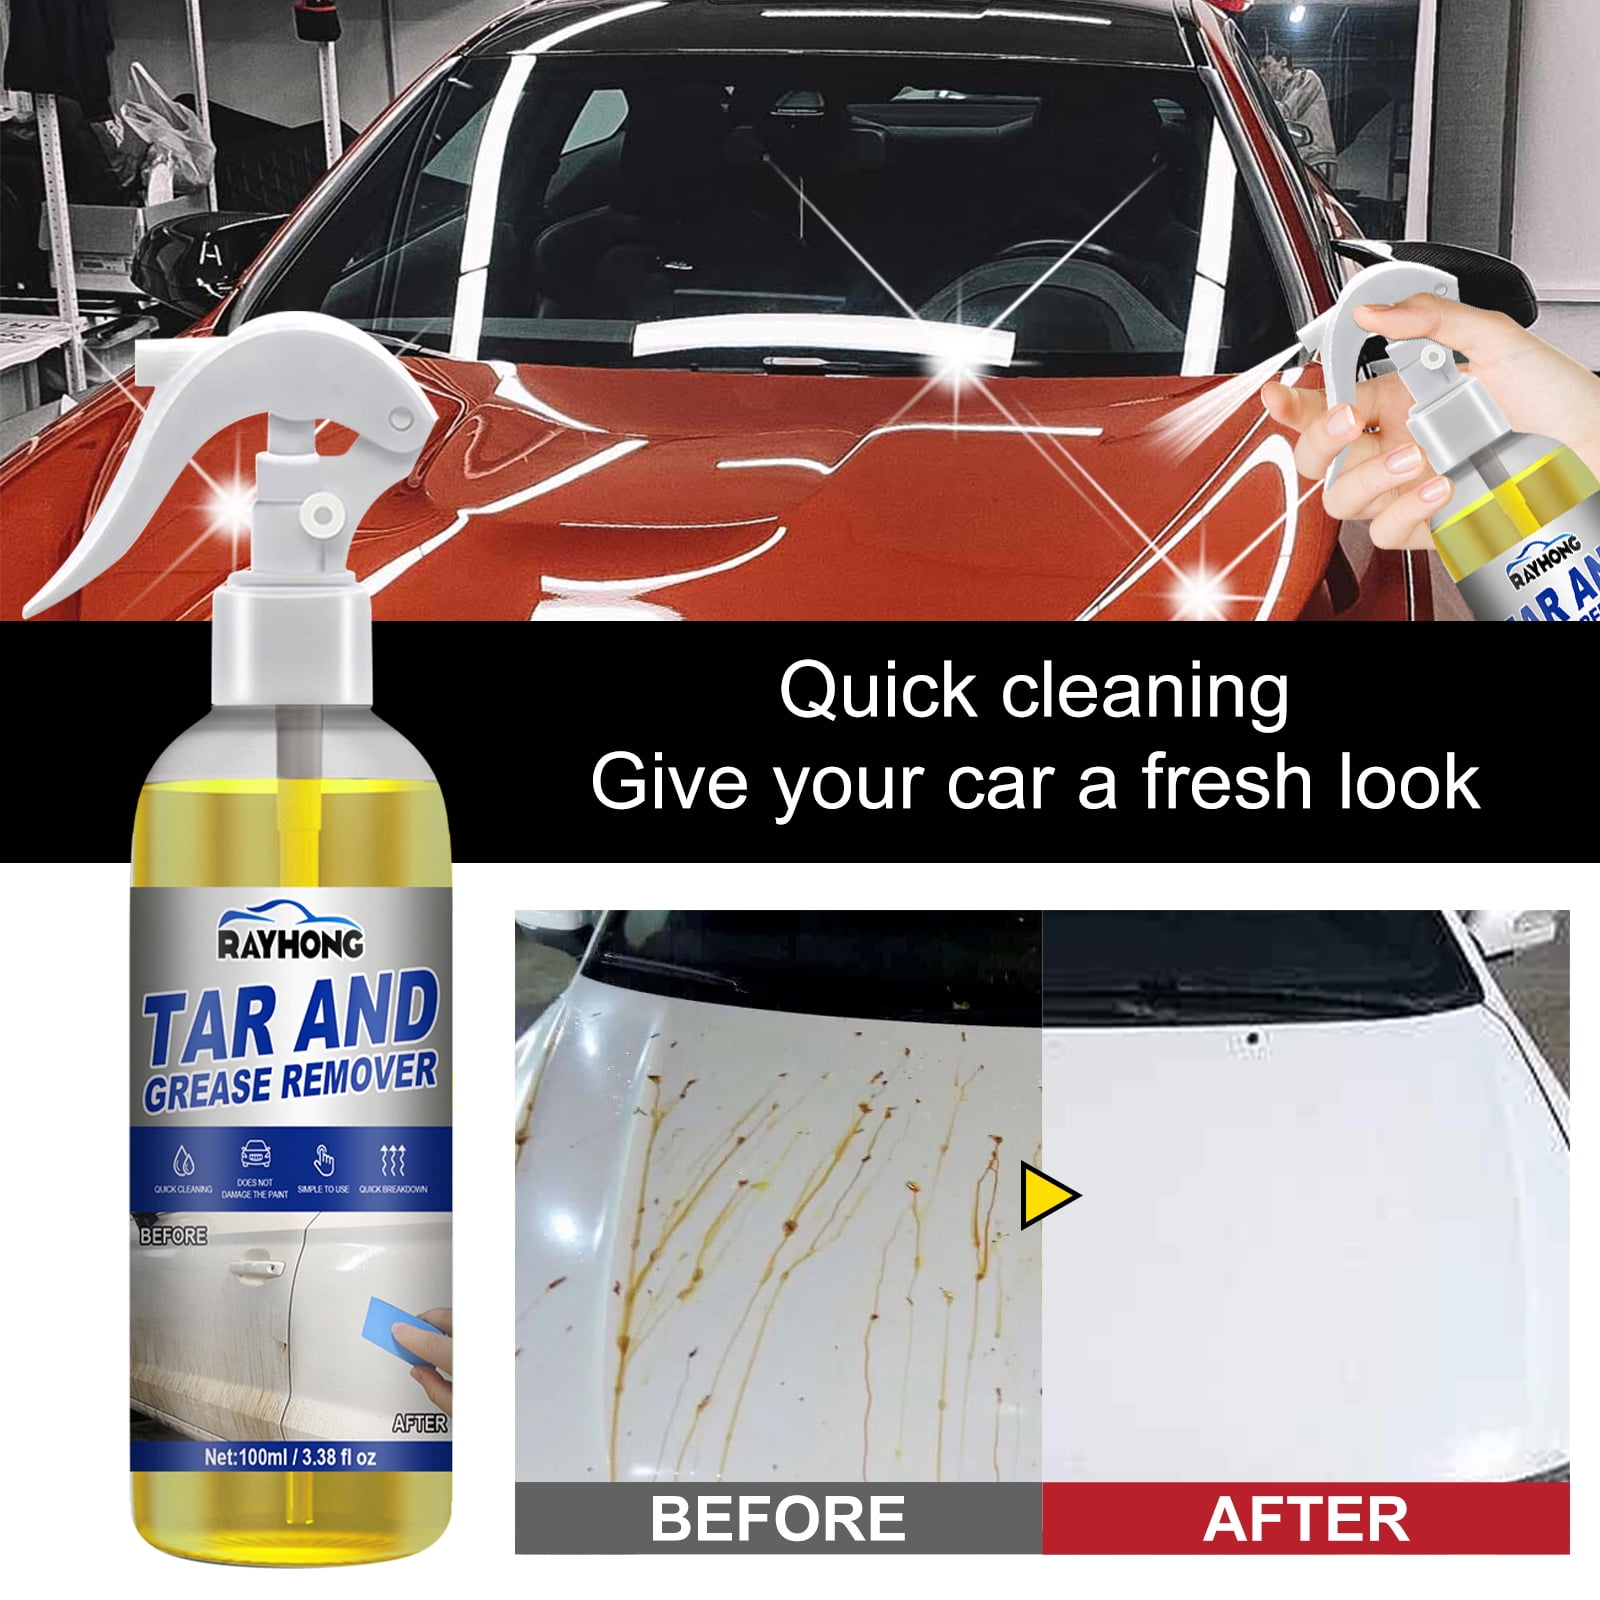 How To: Removing Tar From Your Car Fast and Safely